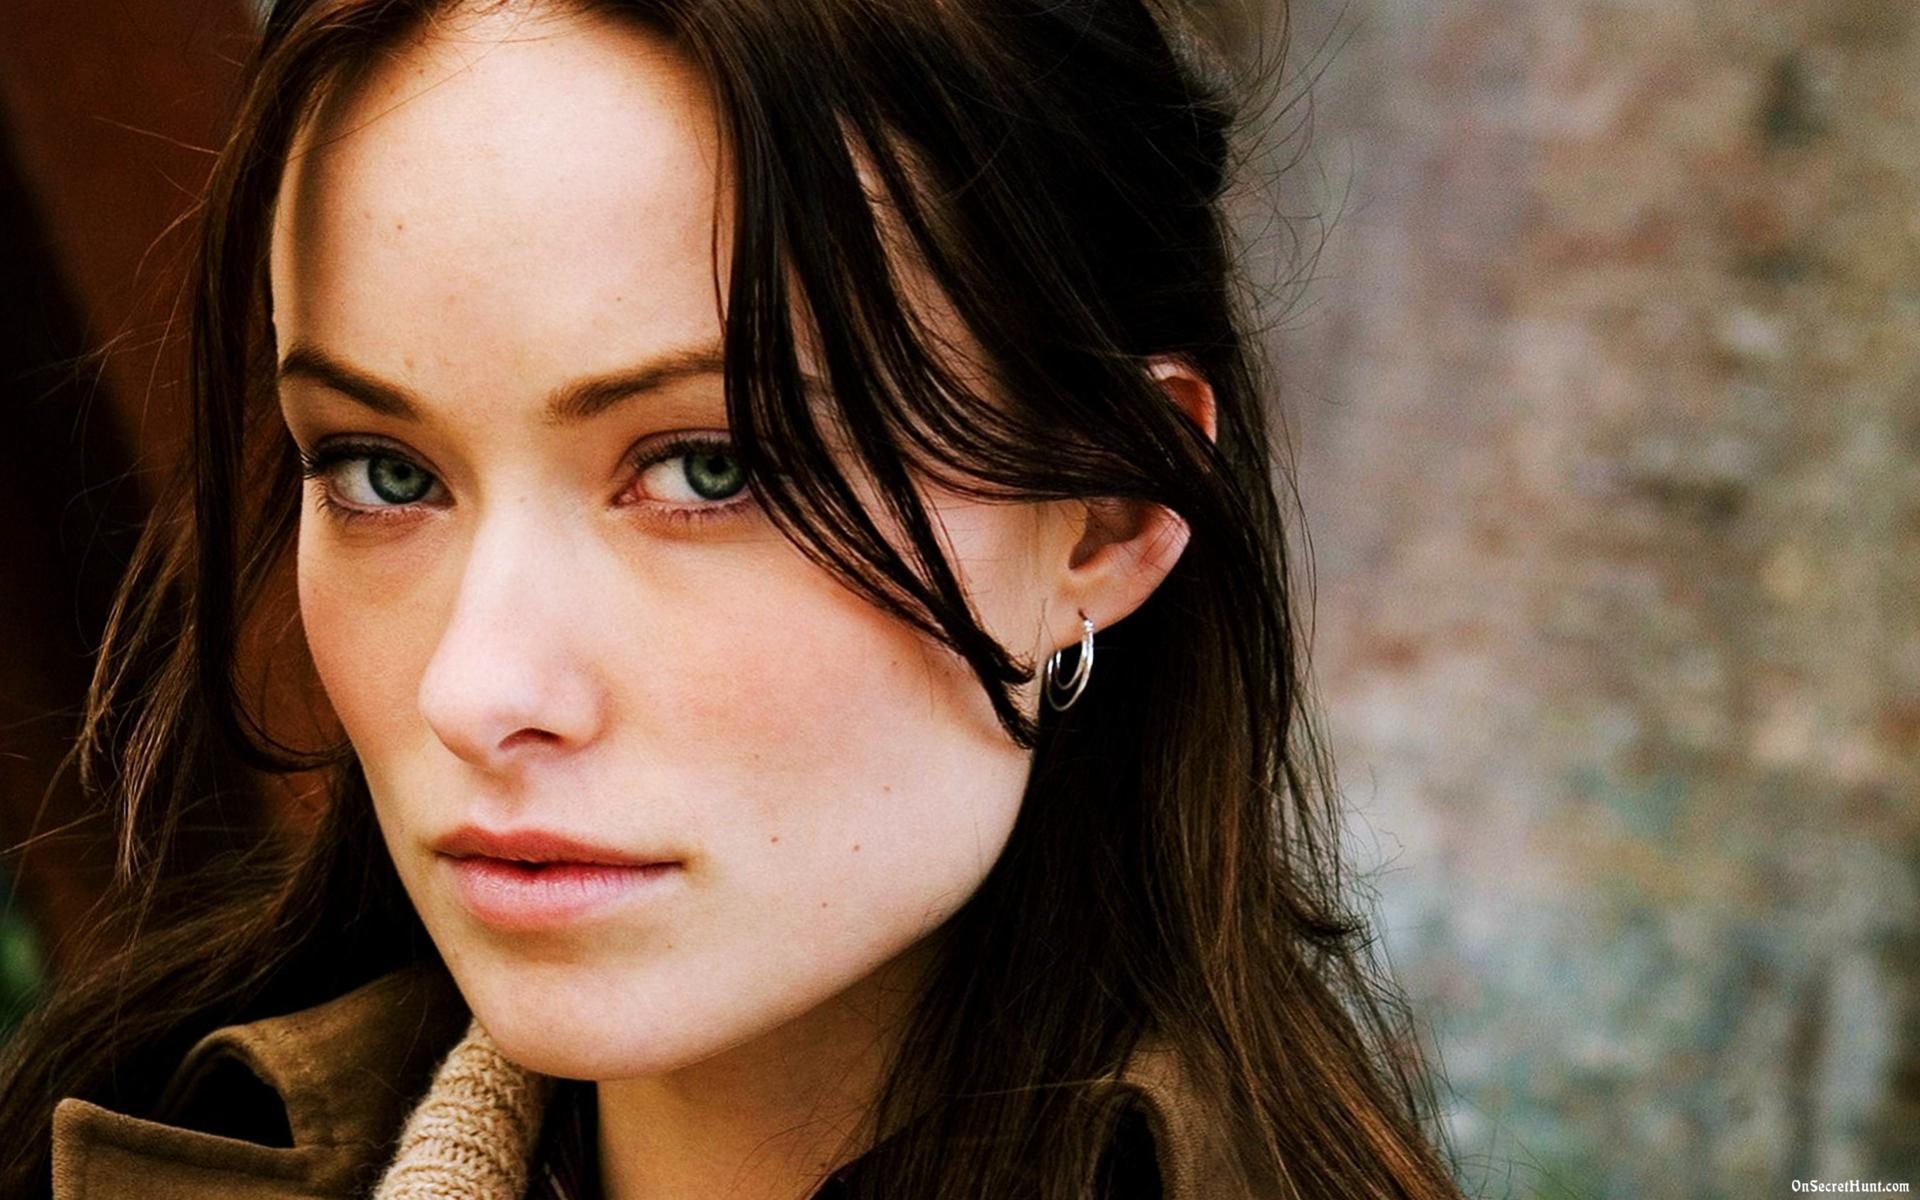 Awesome Olivia Wilde Image 03. hdwallpaper